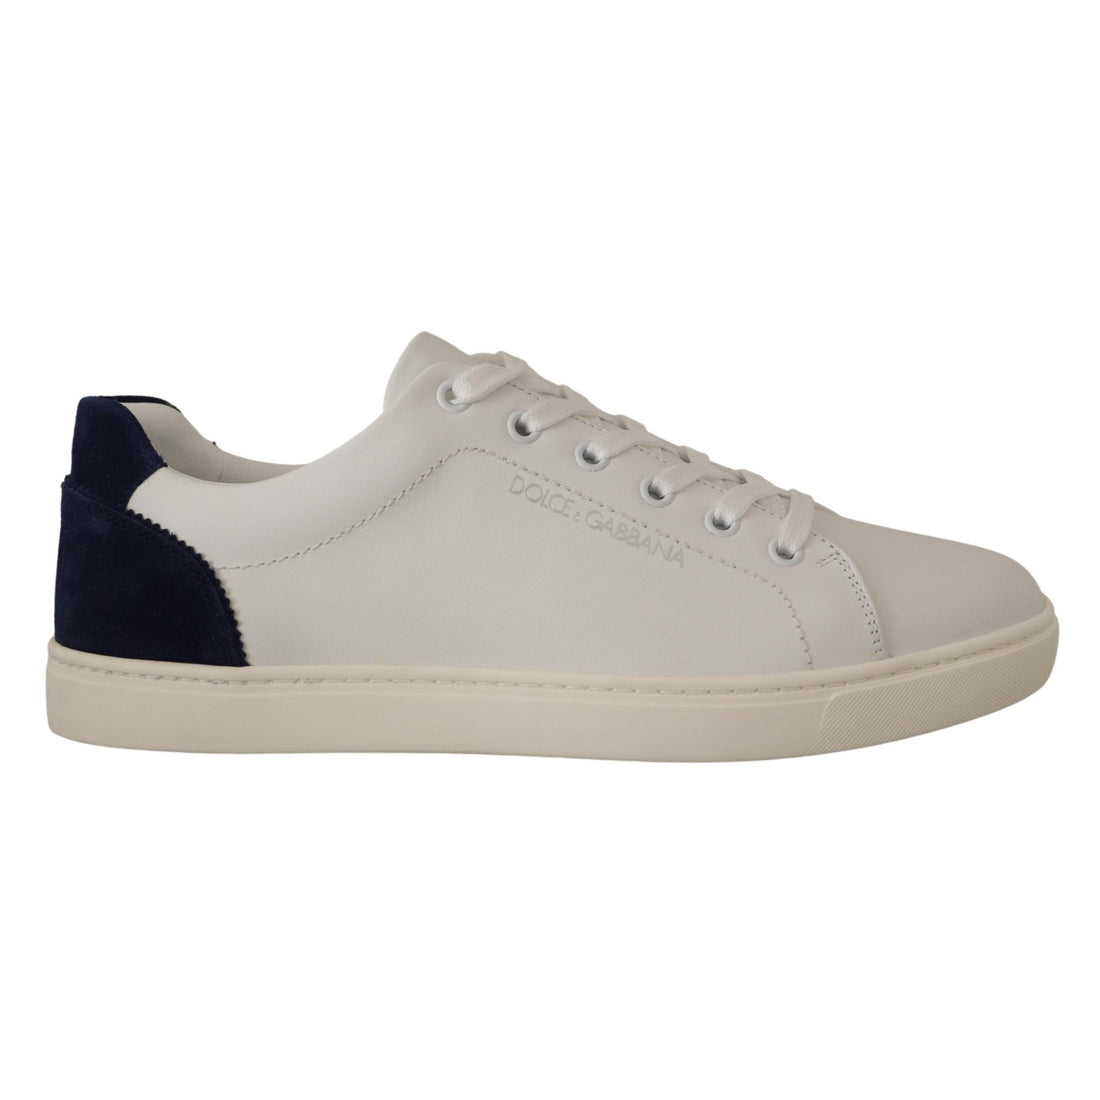 Dolce & Gabbana Elegant White and Blue Low-Top Leather Sneakers